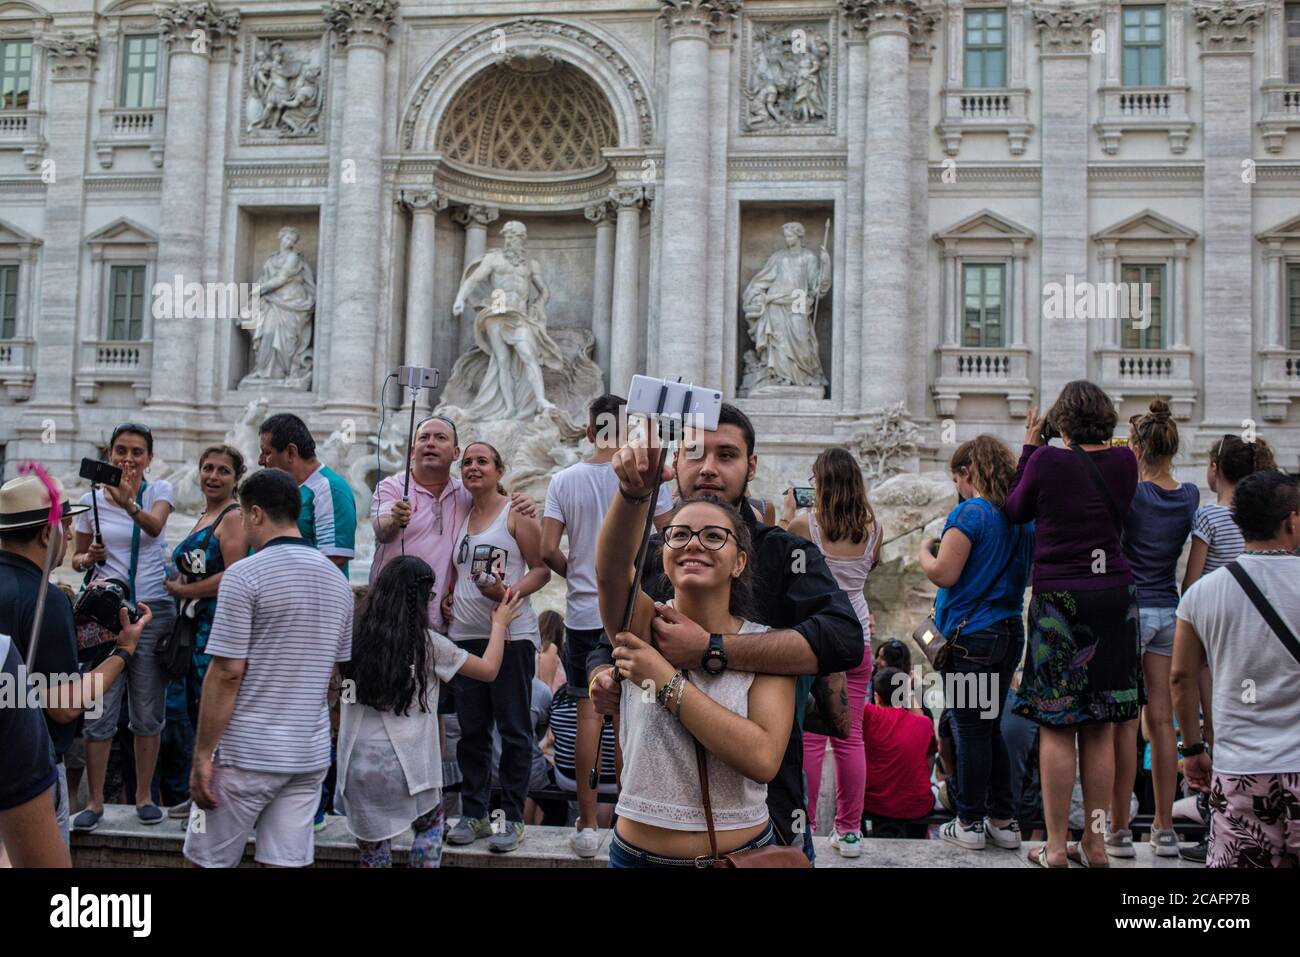 Europe - Italy, capital city Rome: Tourist taking a “selfie” at the Trevi Fountain which is one of the most popular spots in Rome, thousands of people Stock Photo